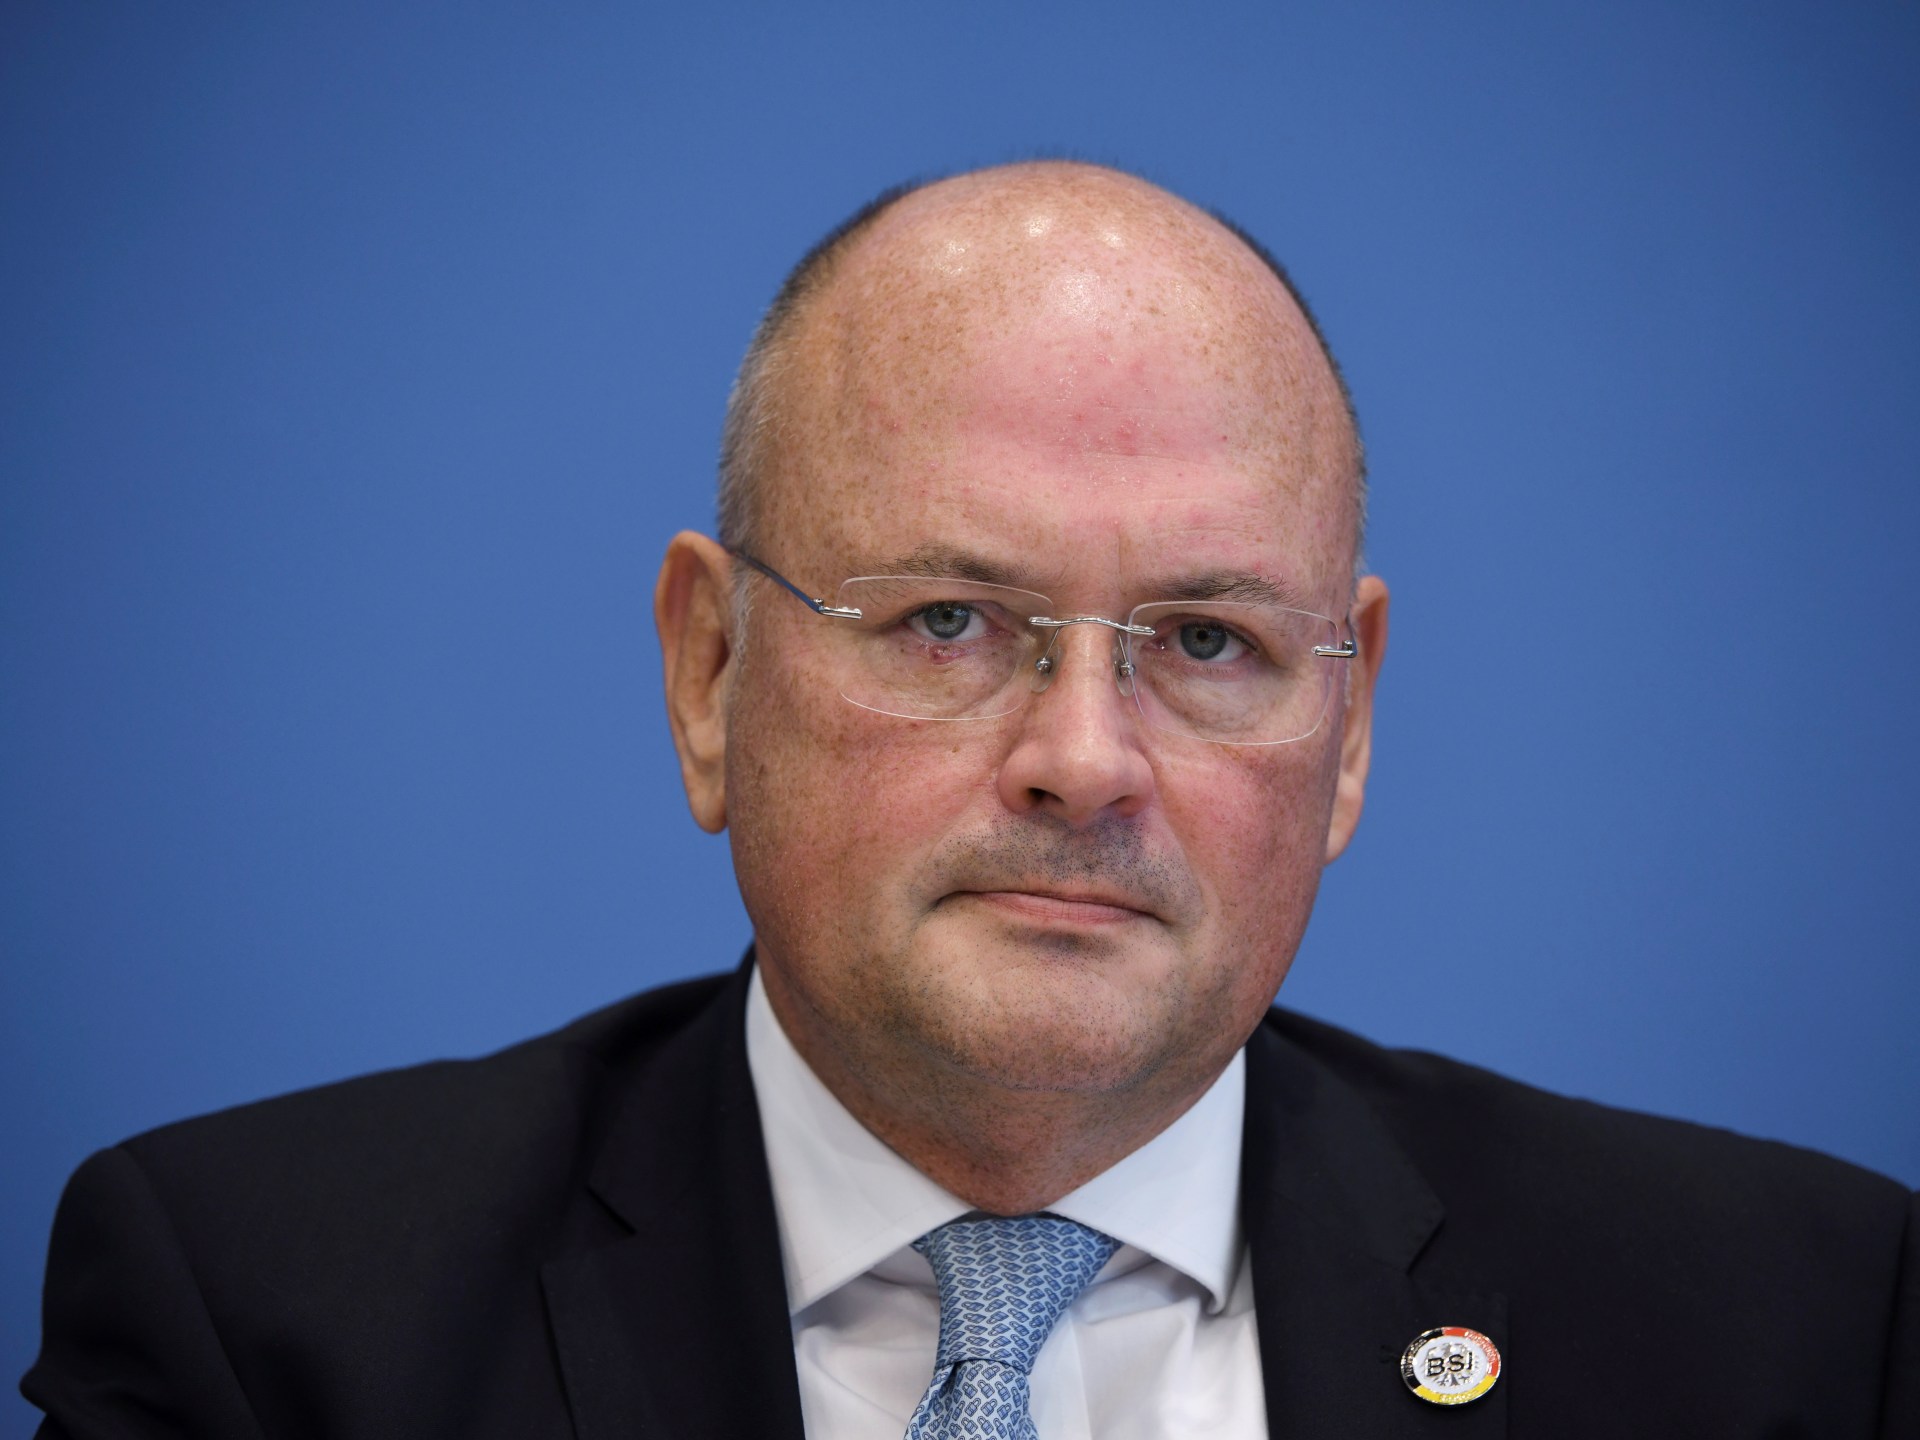 germany-dismisses-cybersecurity-chief-over-alleged-russian-ties